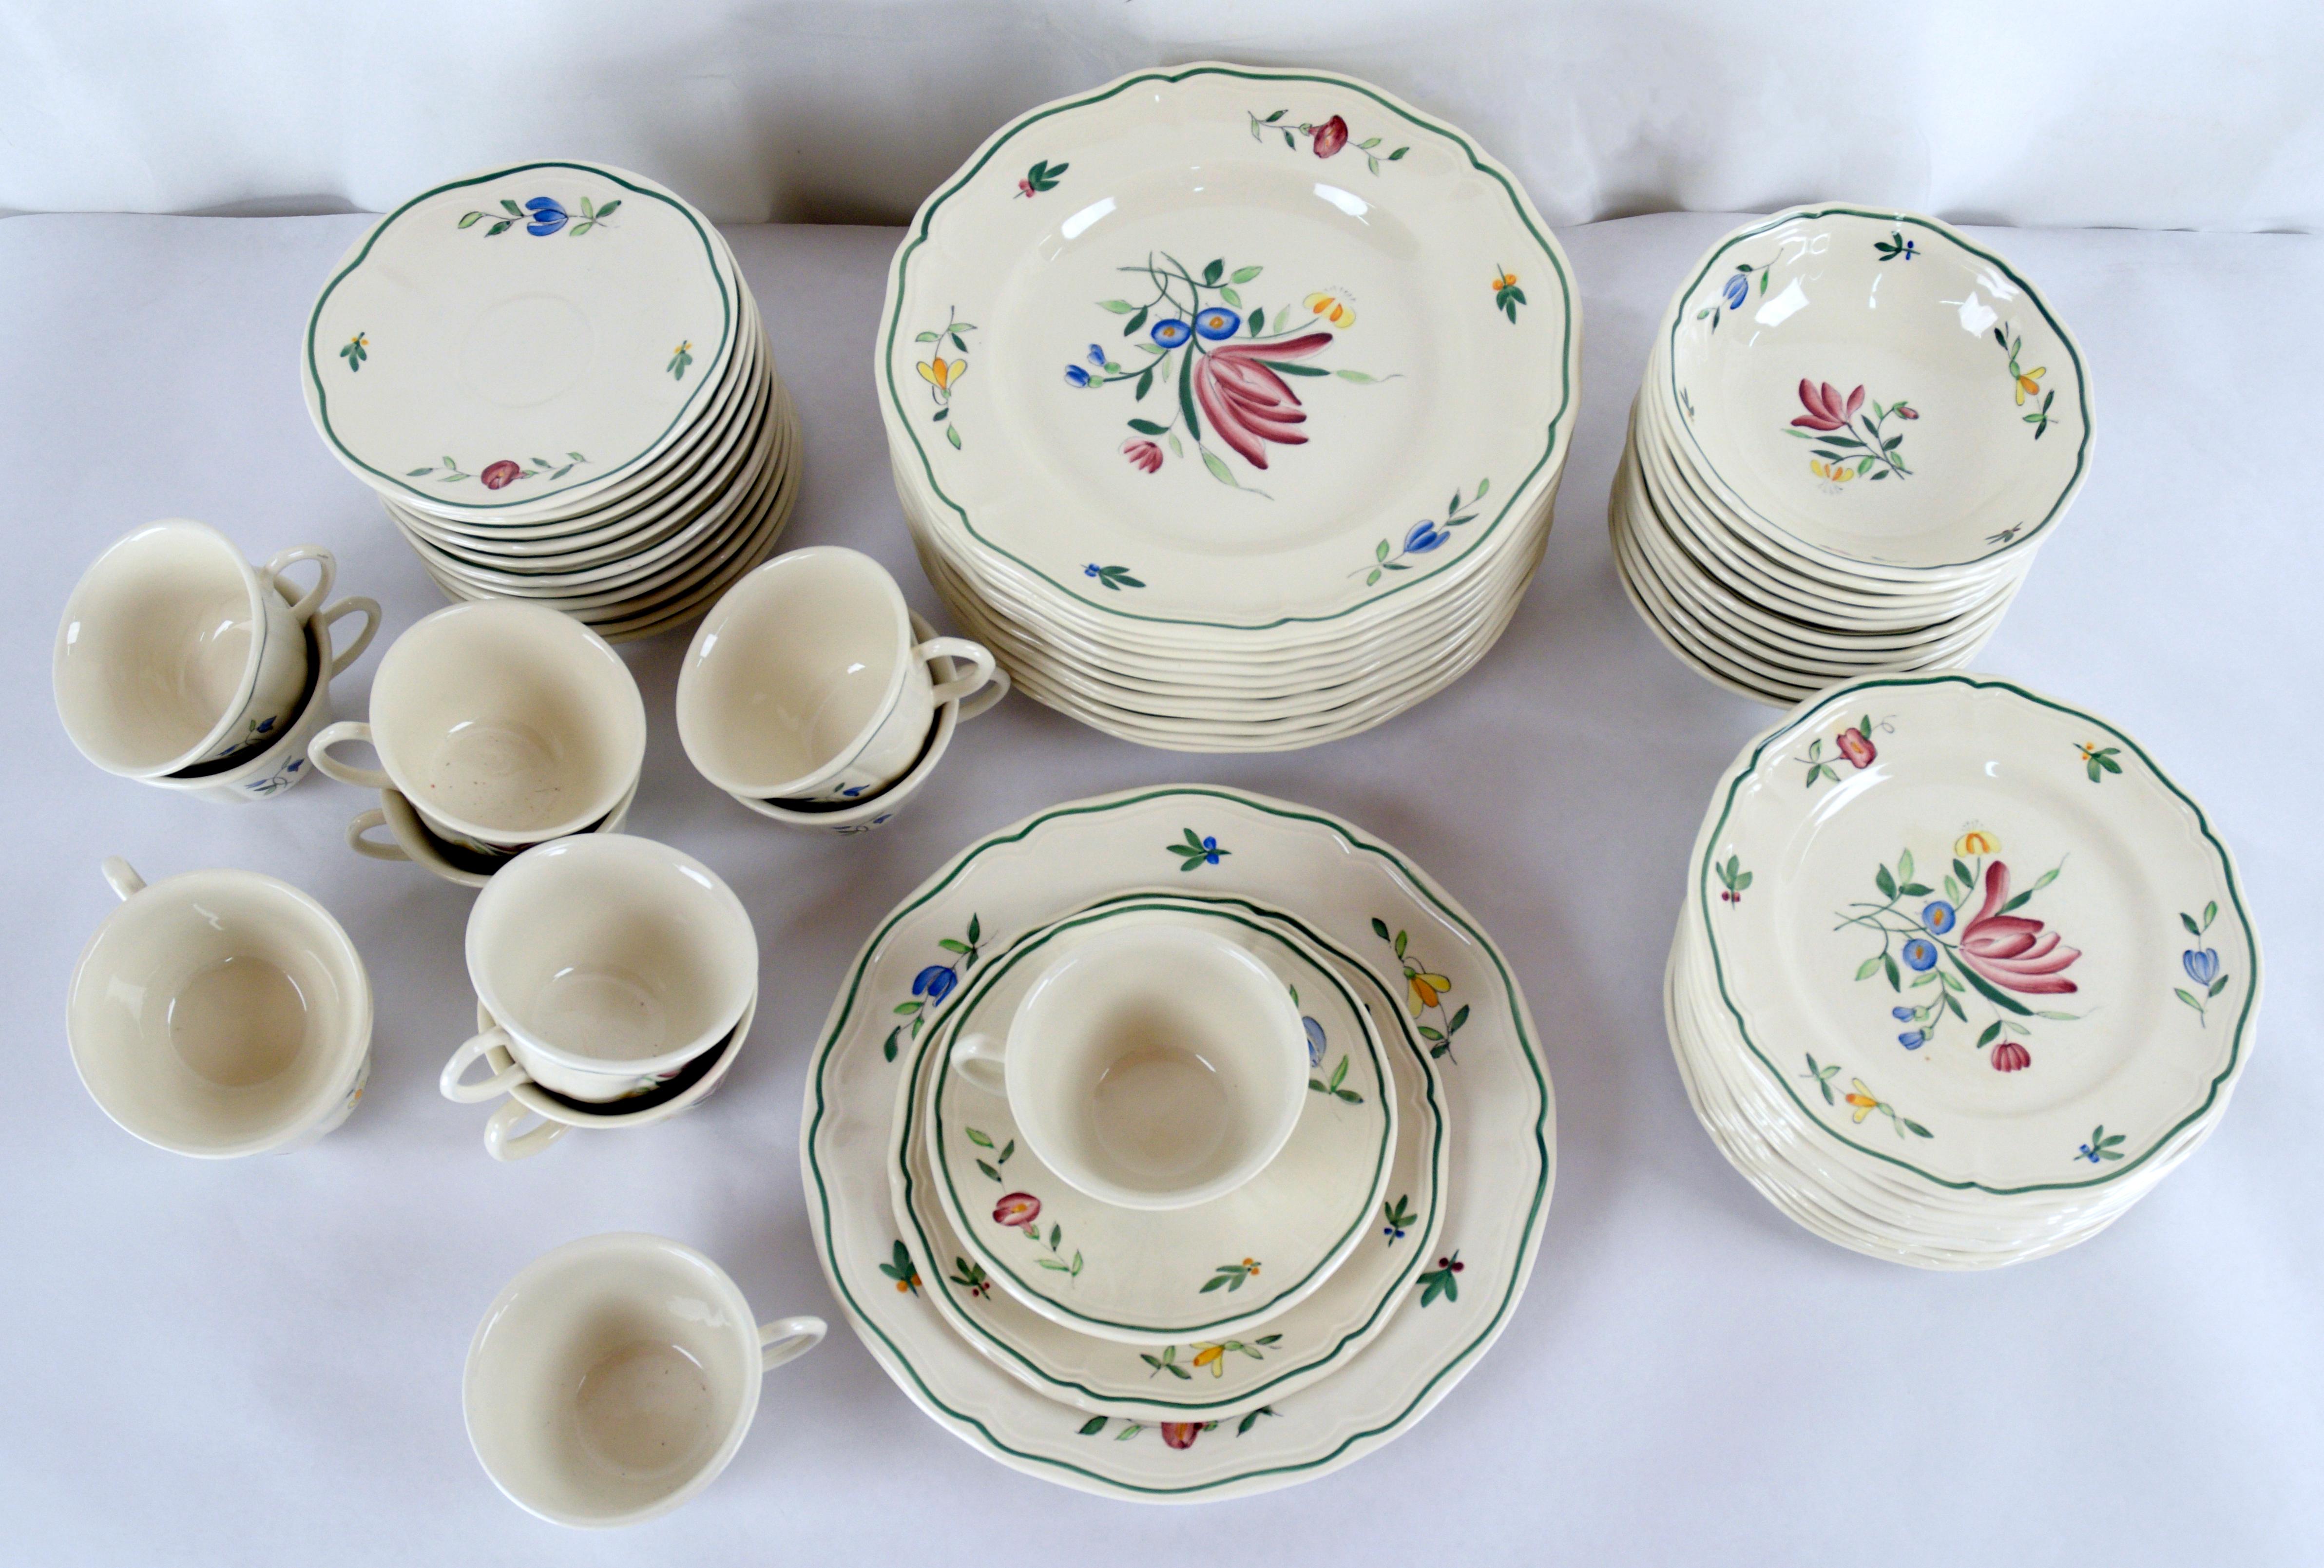 Vintage 5-Piece Longchamp Tulip Place Setting, Set of 12, France

This beautifully hand-painted dish set is a rare find with all twelve 5-piece settings in good condition. The tulip pattern features brightly colored flowers encircled by an emerald